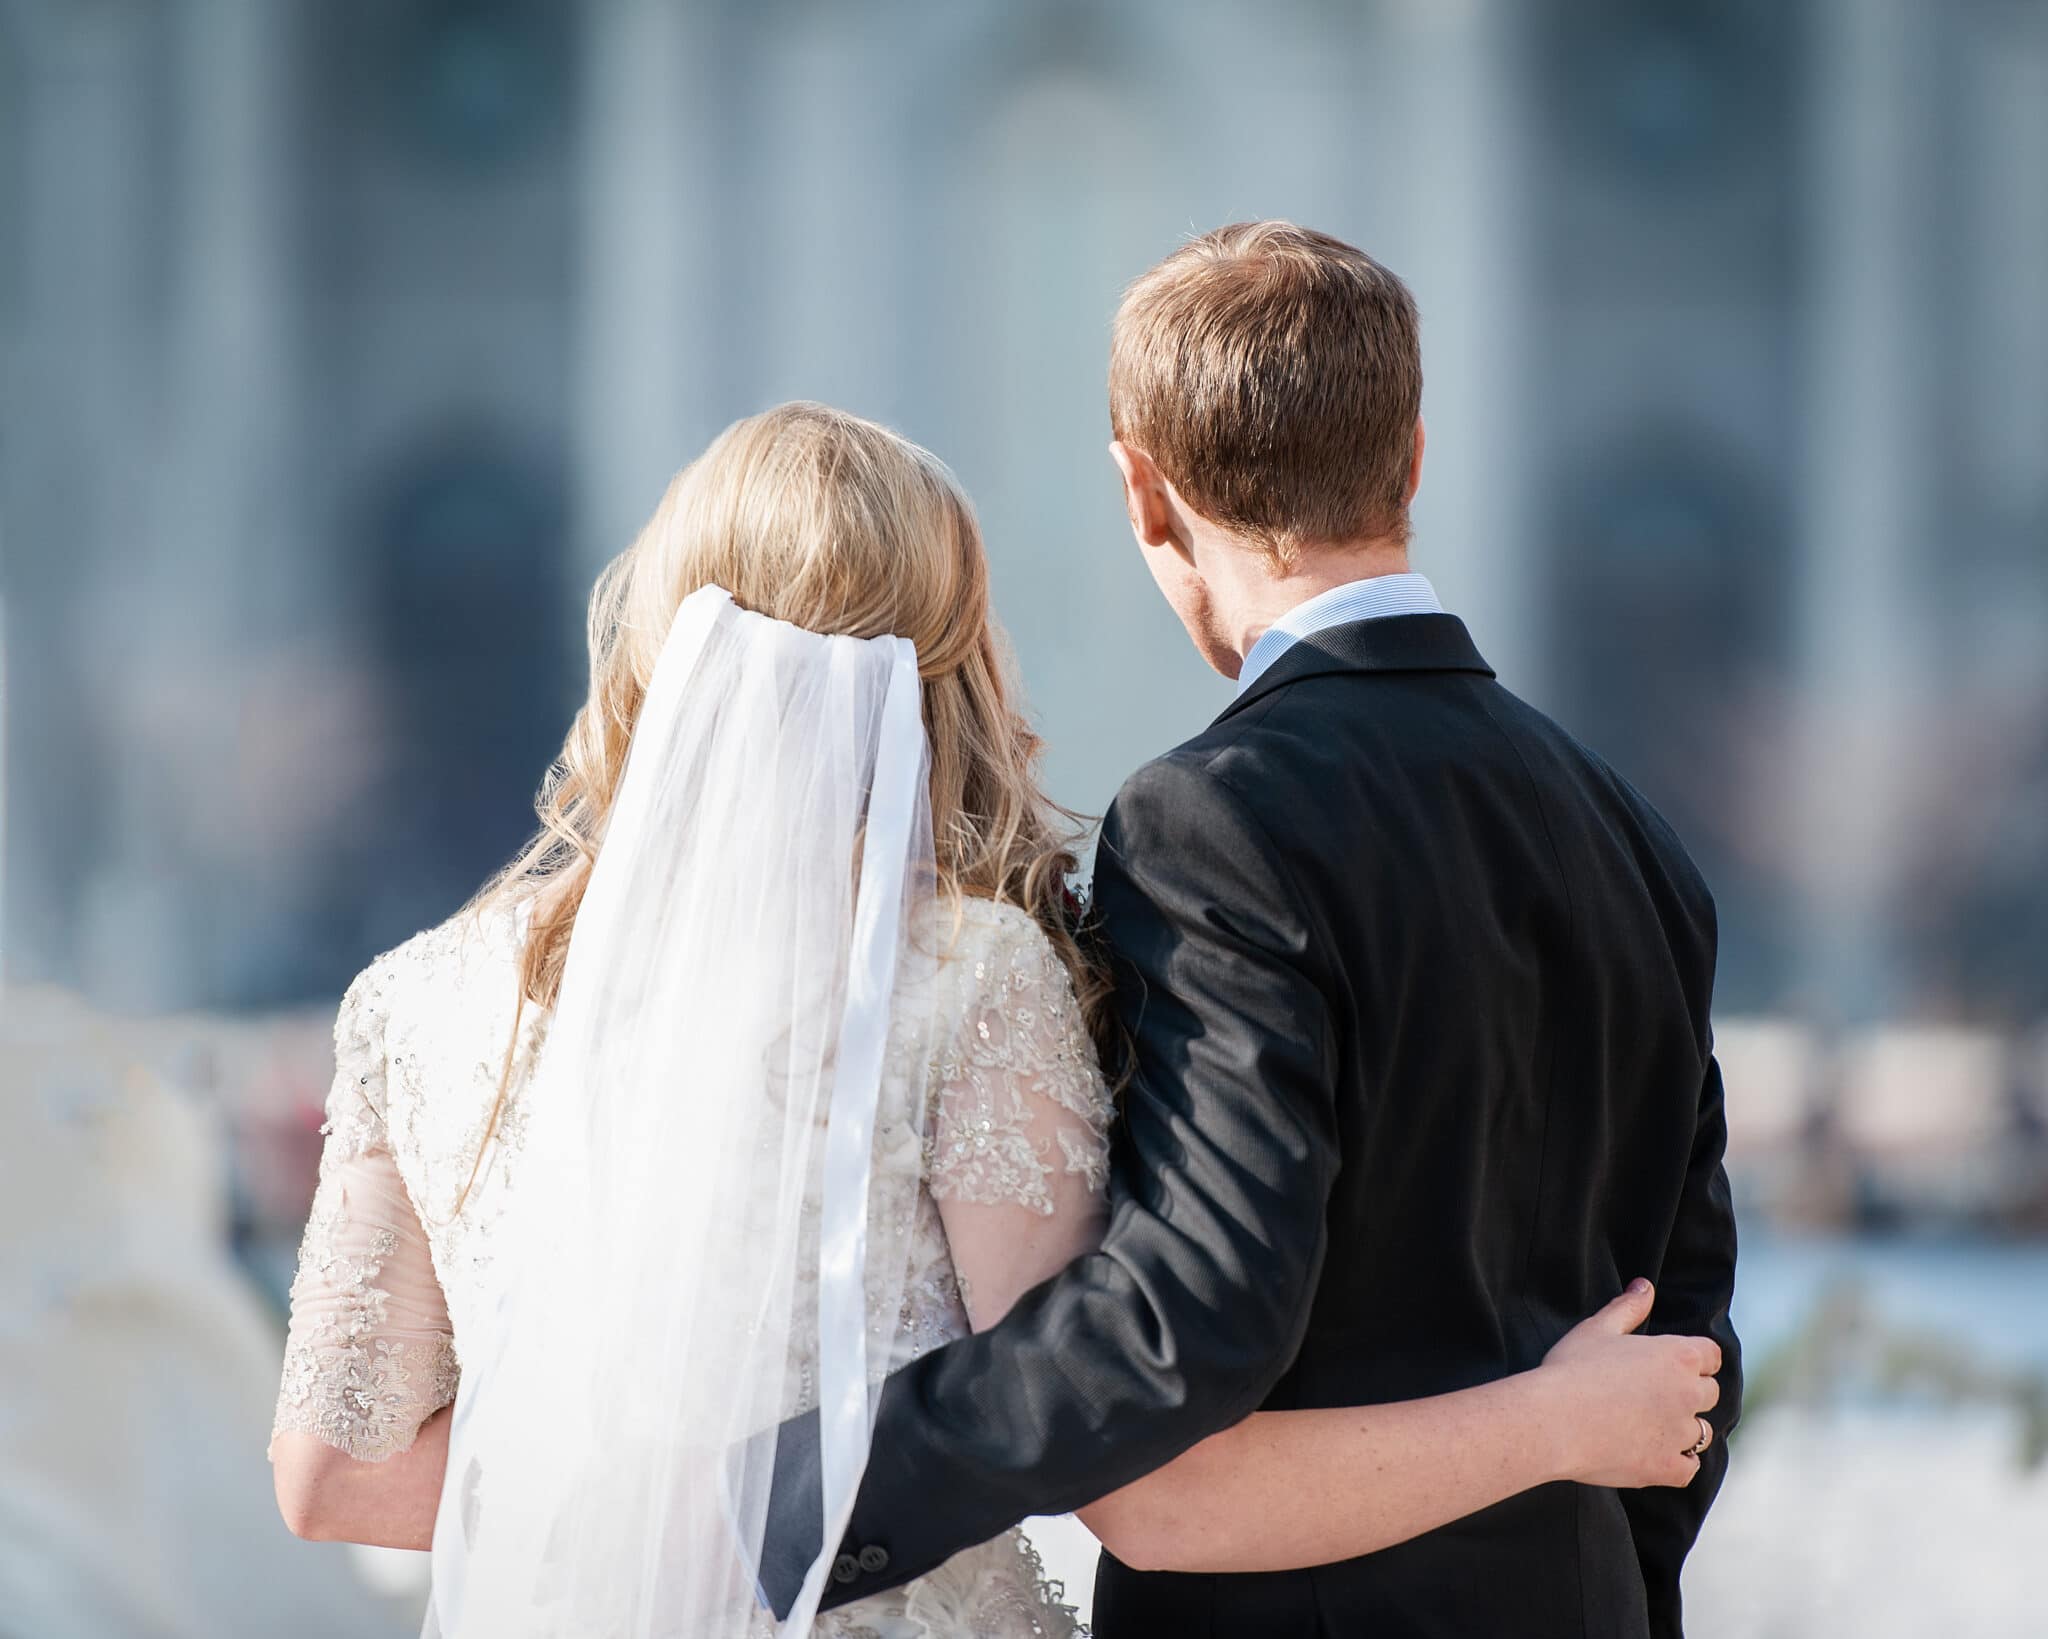 A backside view of a newly married couple that are holding their arms around each other as they stop in front of an LDS temple blurred in the background.